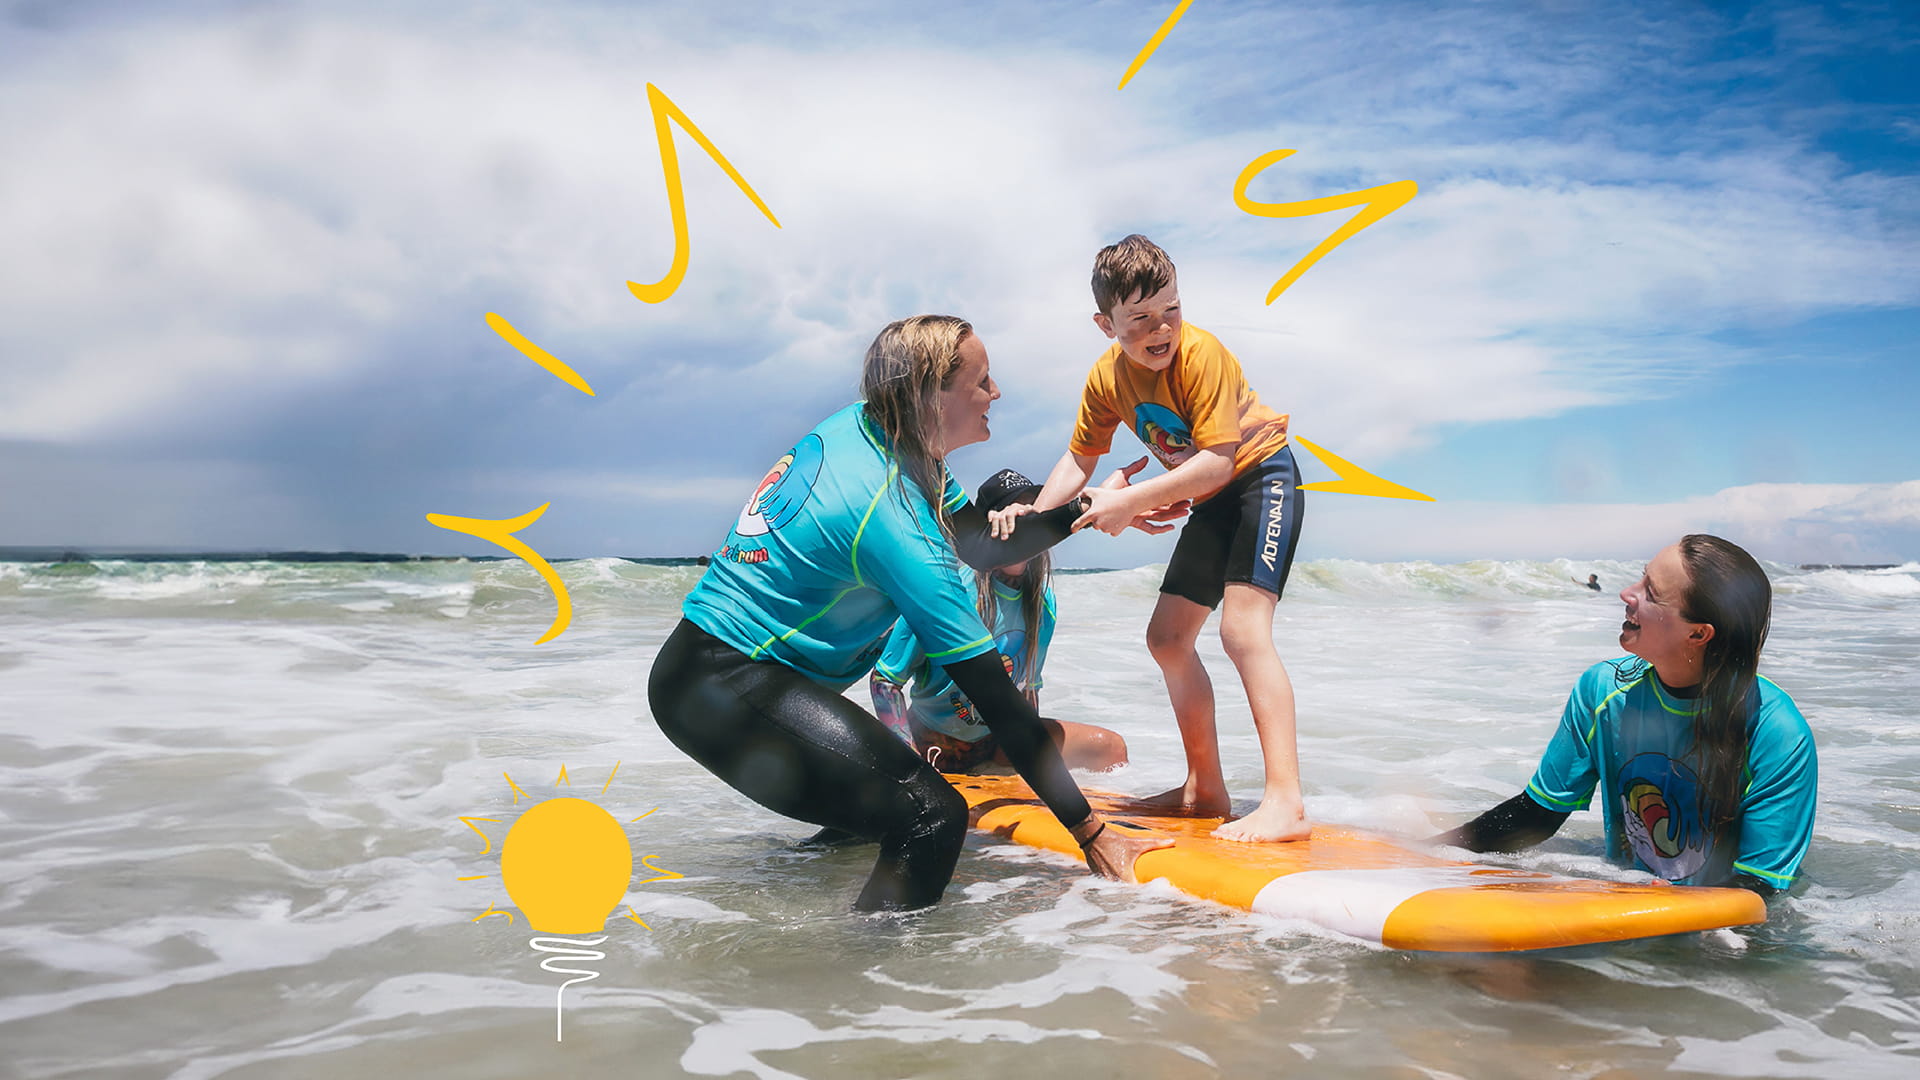 Two women helping a child learn how to surf on a board in the ocean, enjoying a sunny day together.